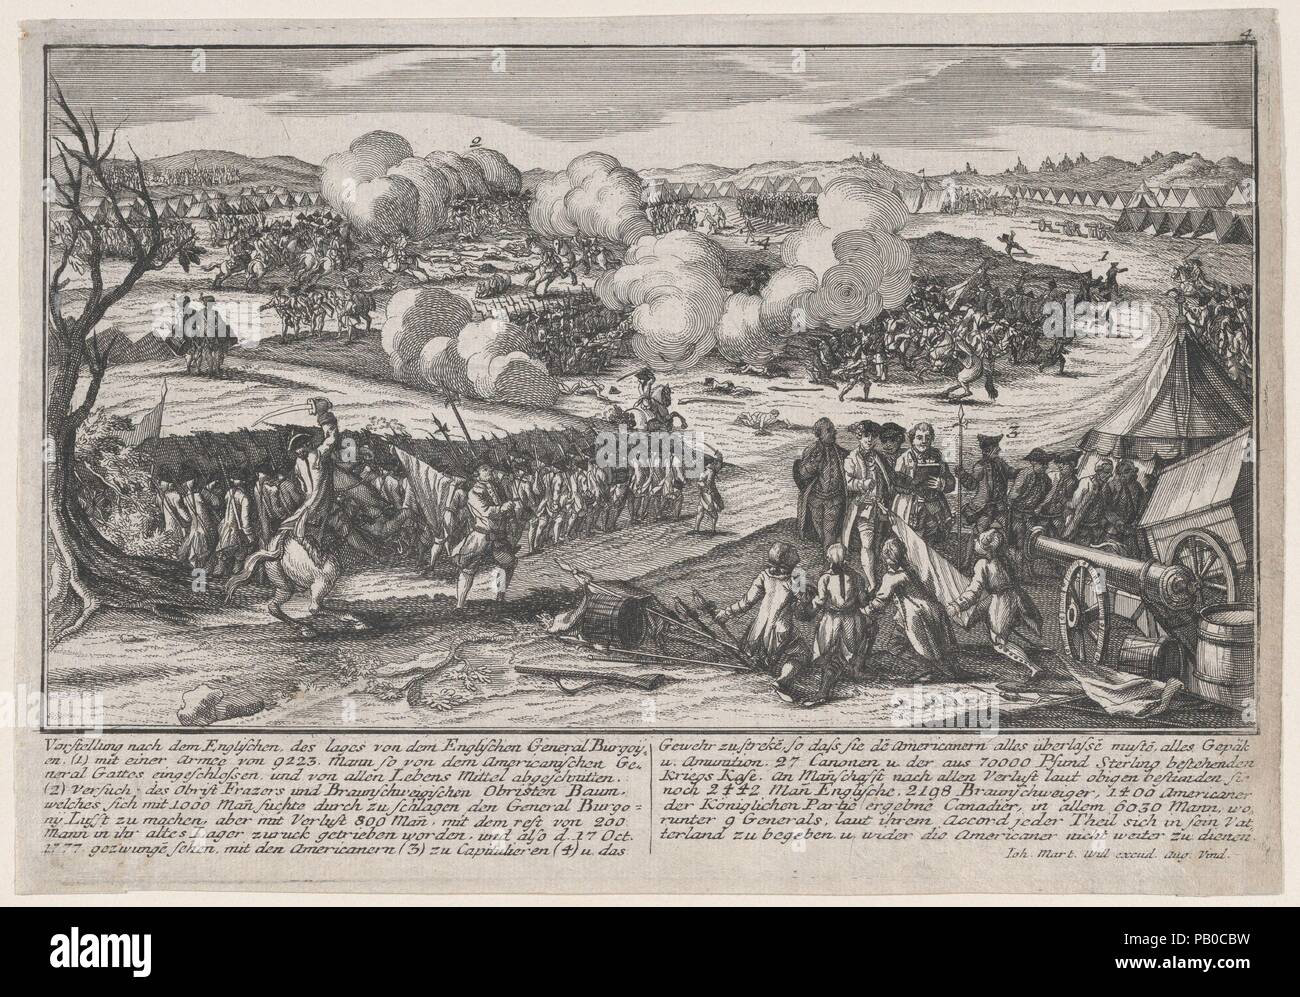 Battle of Saratoga (September 19, 1777). Dimensions: sheet: 8 1/8 x 11 13/16 in. (20.7 x 30 cm). Publisher: Published by Johann Martin Will (German, 1727-1806) , Augsburg. Museum: Metropolitan Museum of Art, New York, USA. Stock Photo